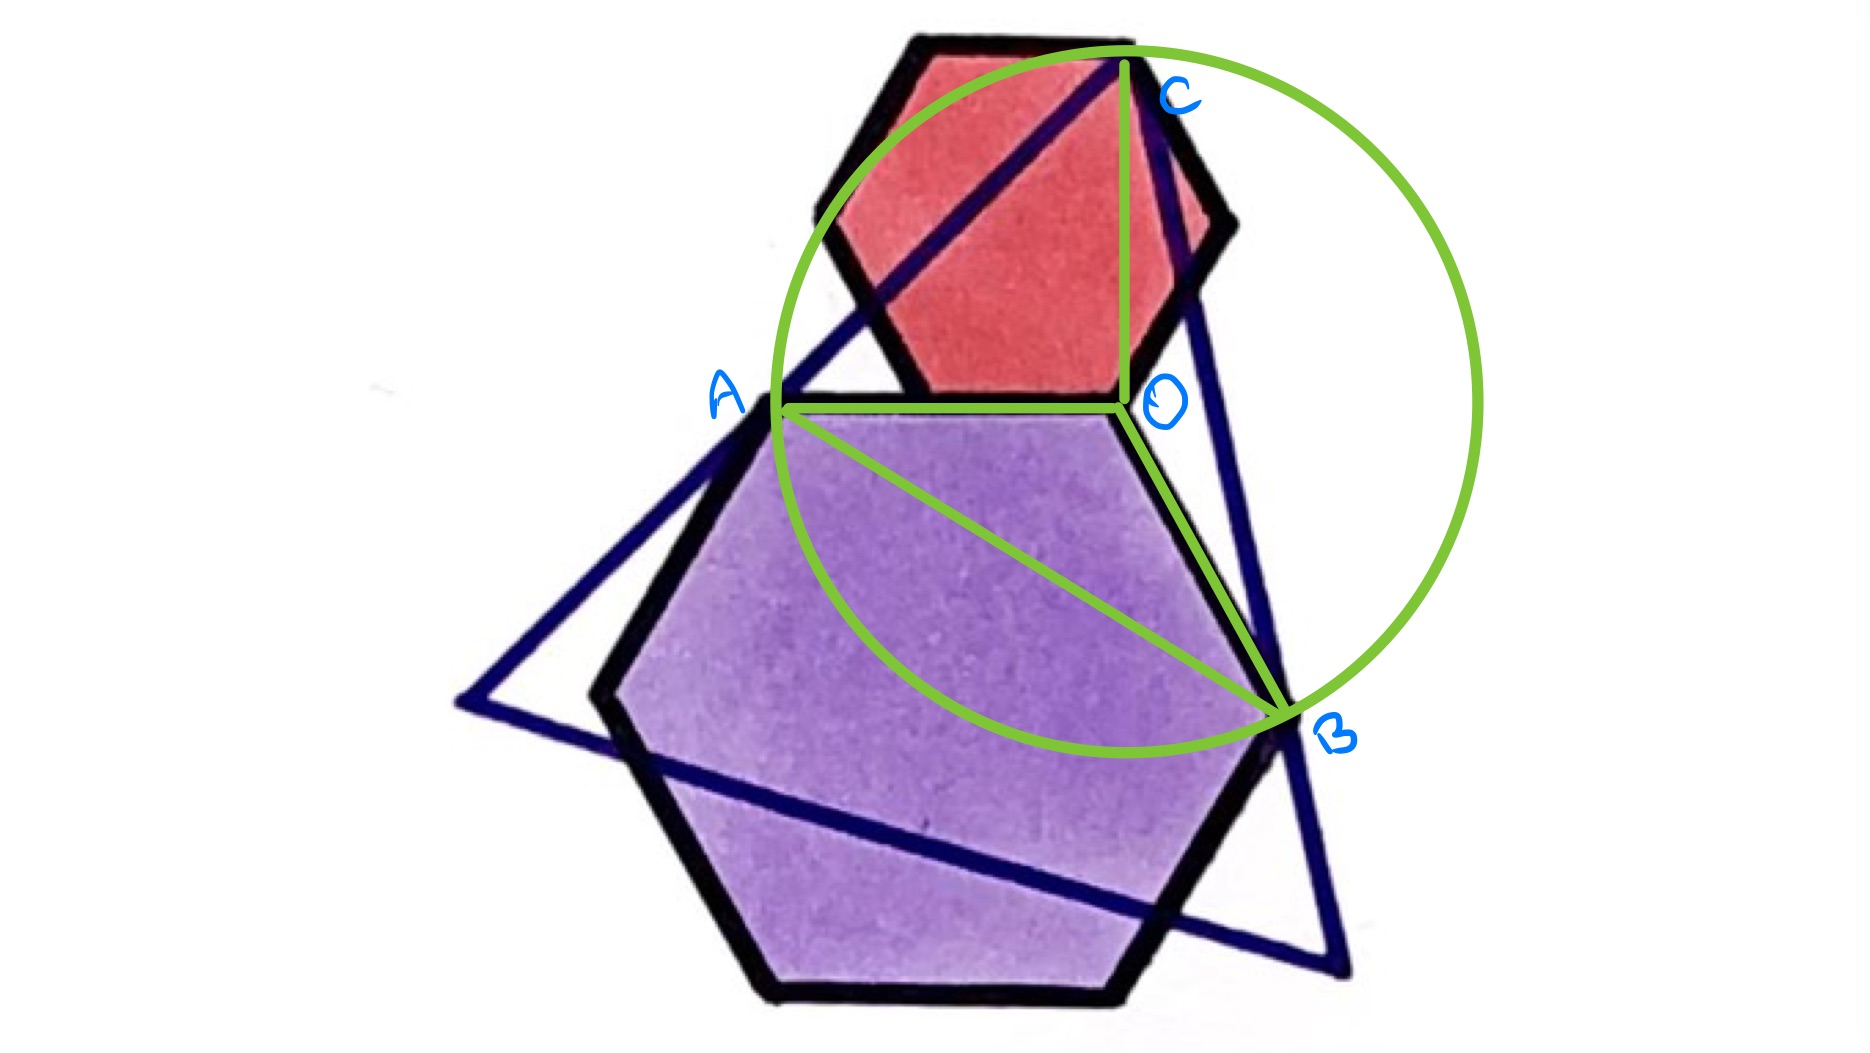 Two hexagons and a triangle with labels